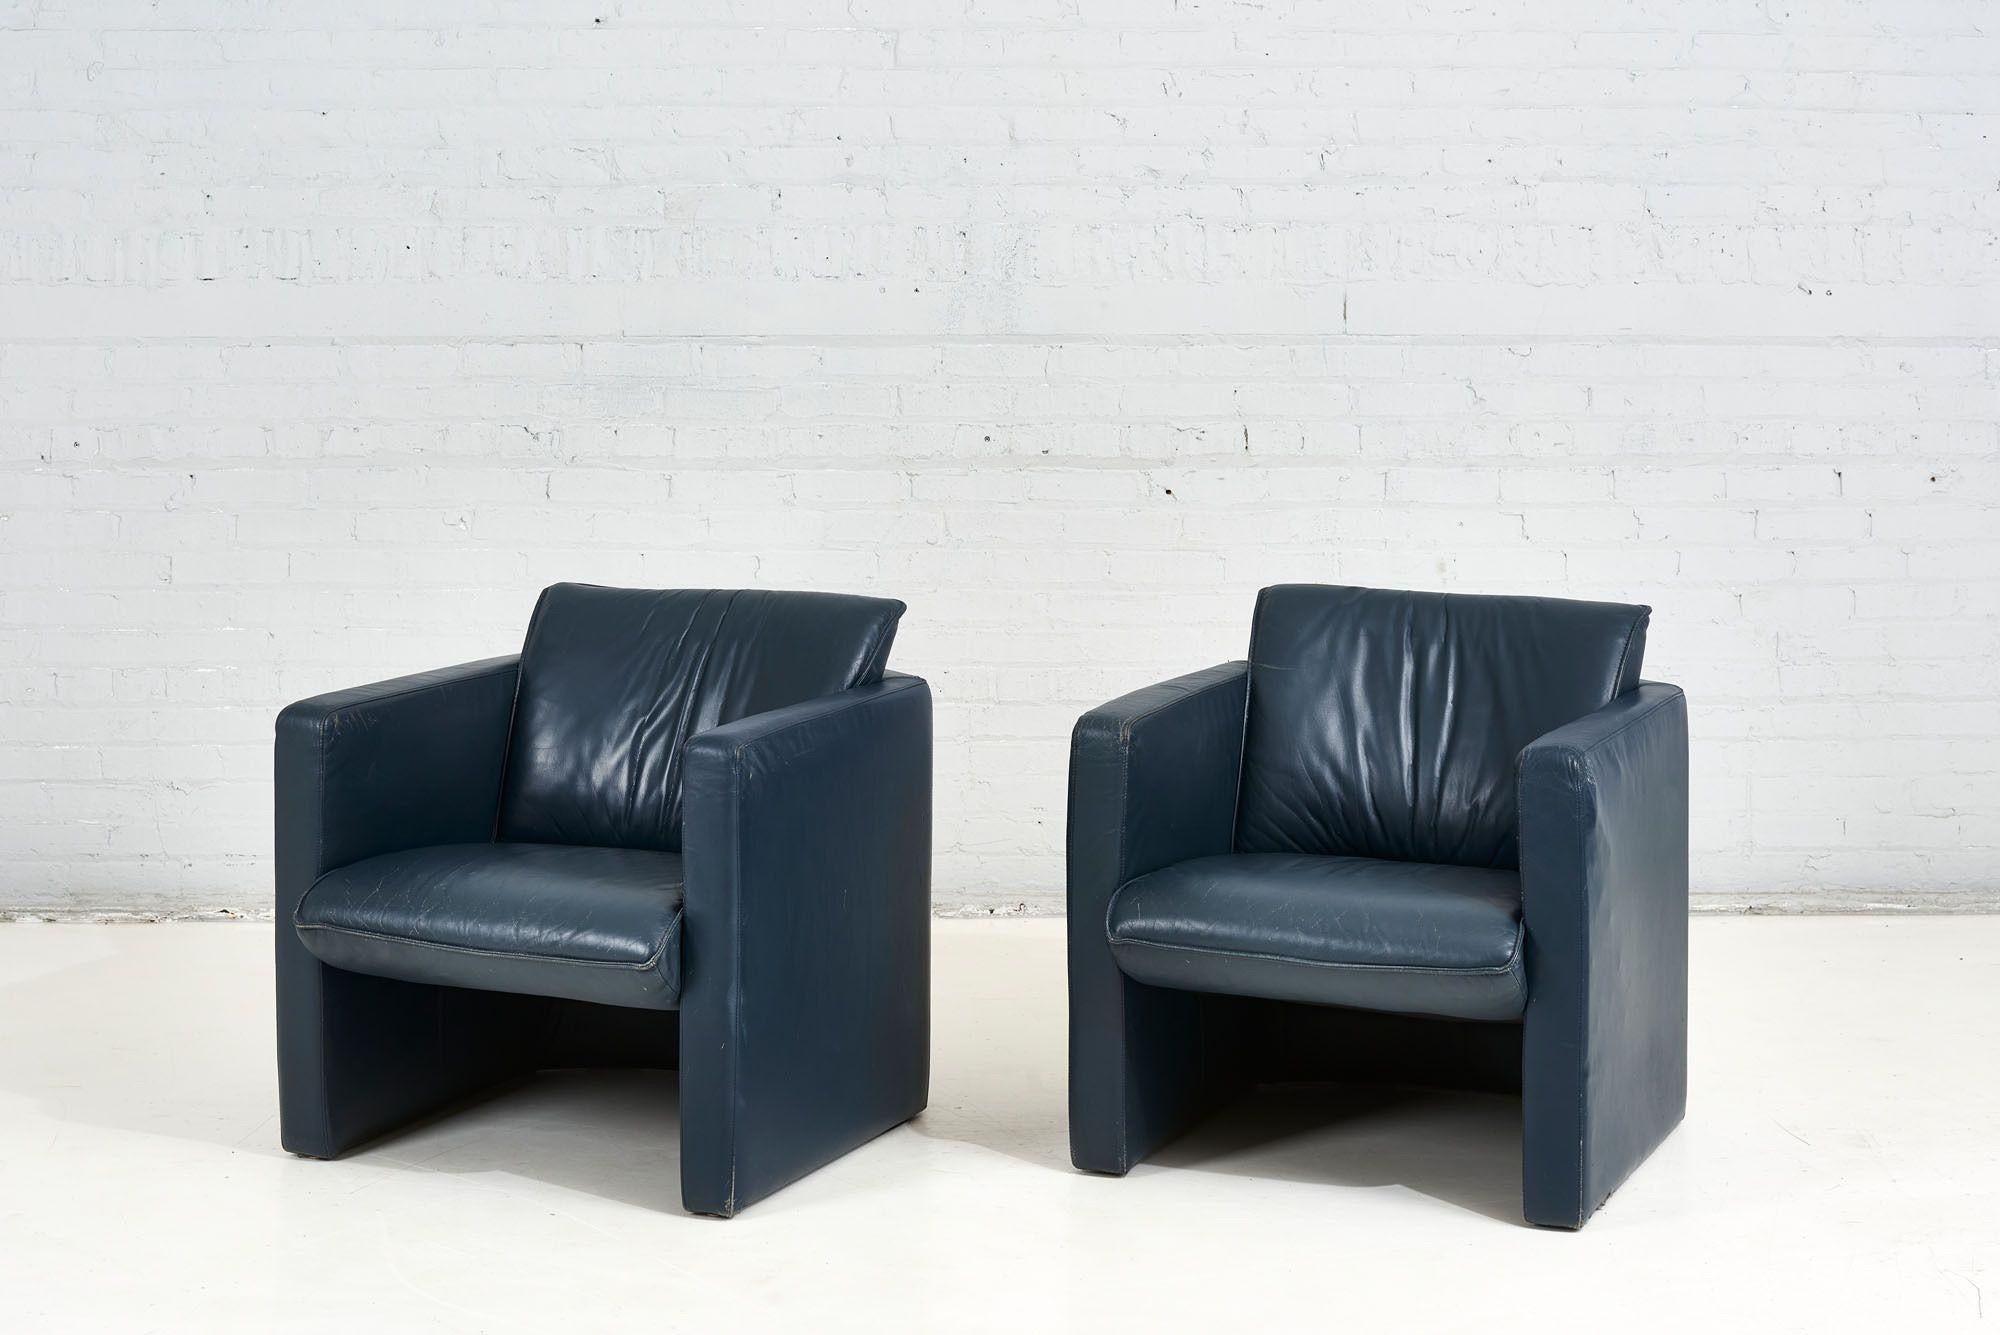 American Post Modern Barrel Leather Chairs by Leolux, 1970 For Sale